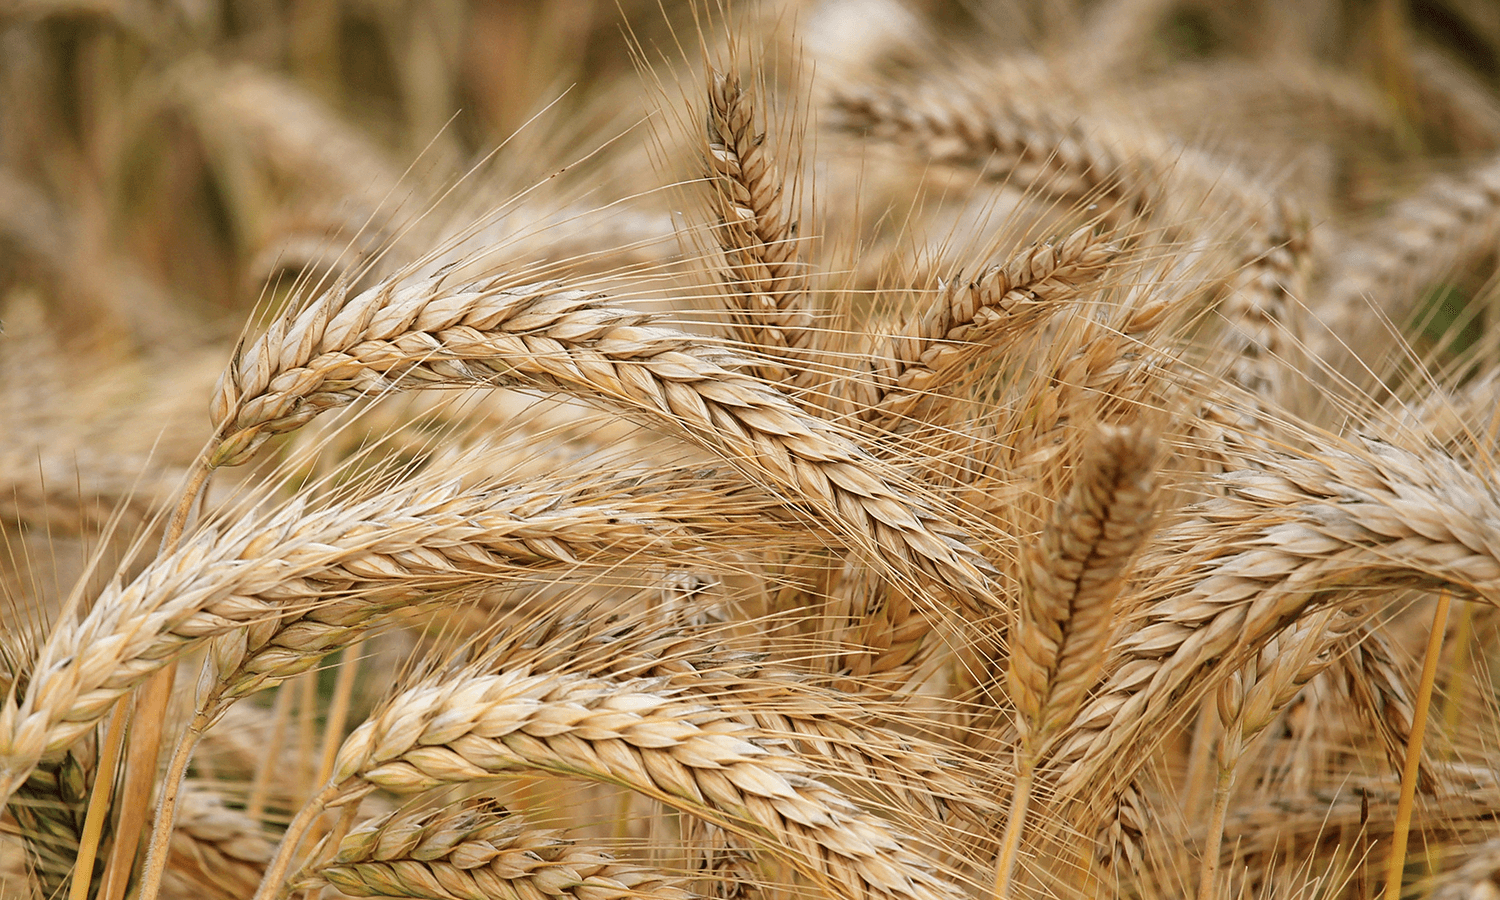 Which of the following picture best describes “barley” ?  